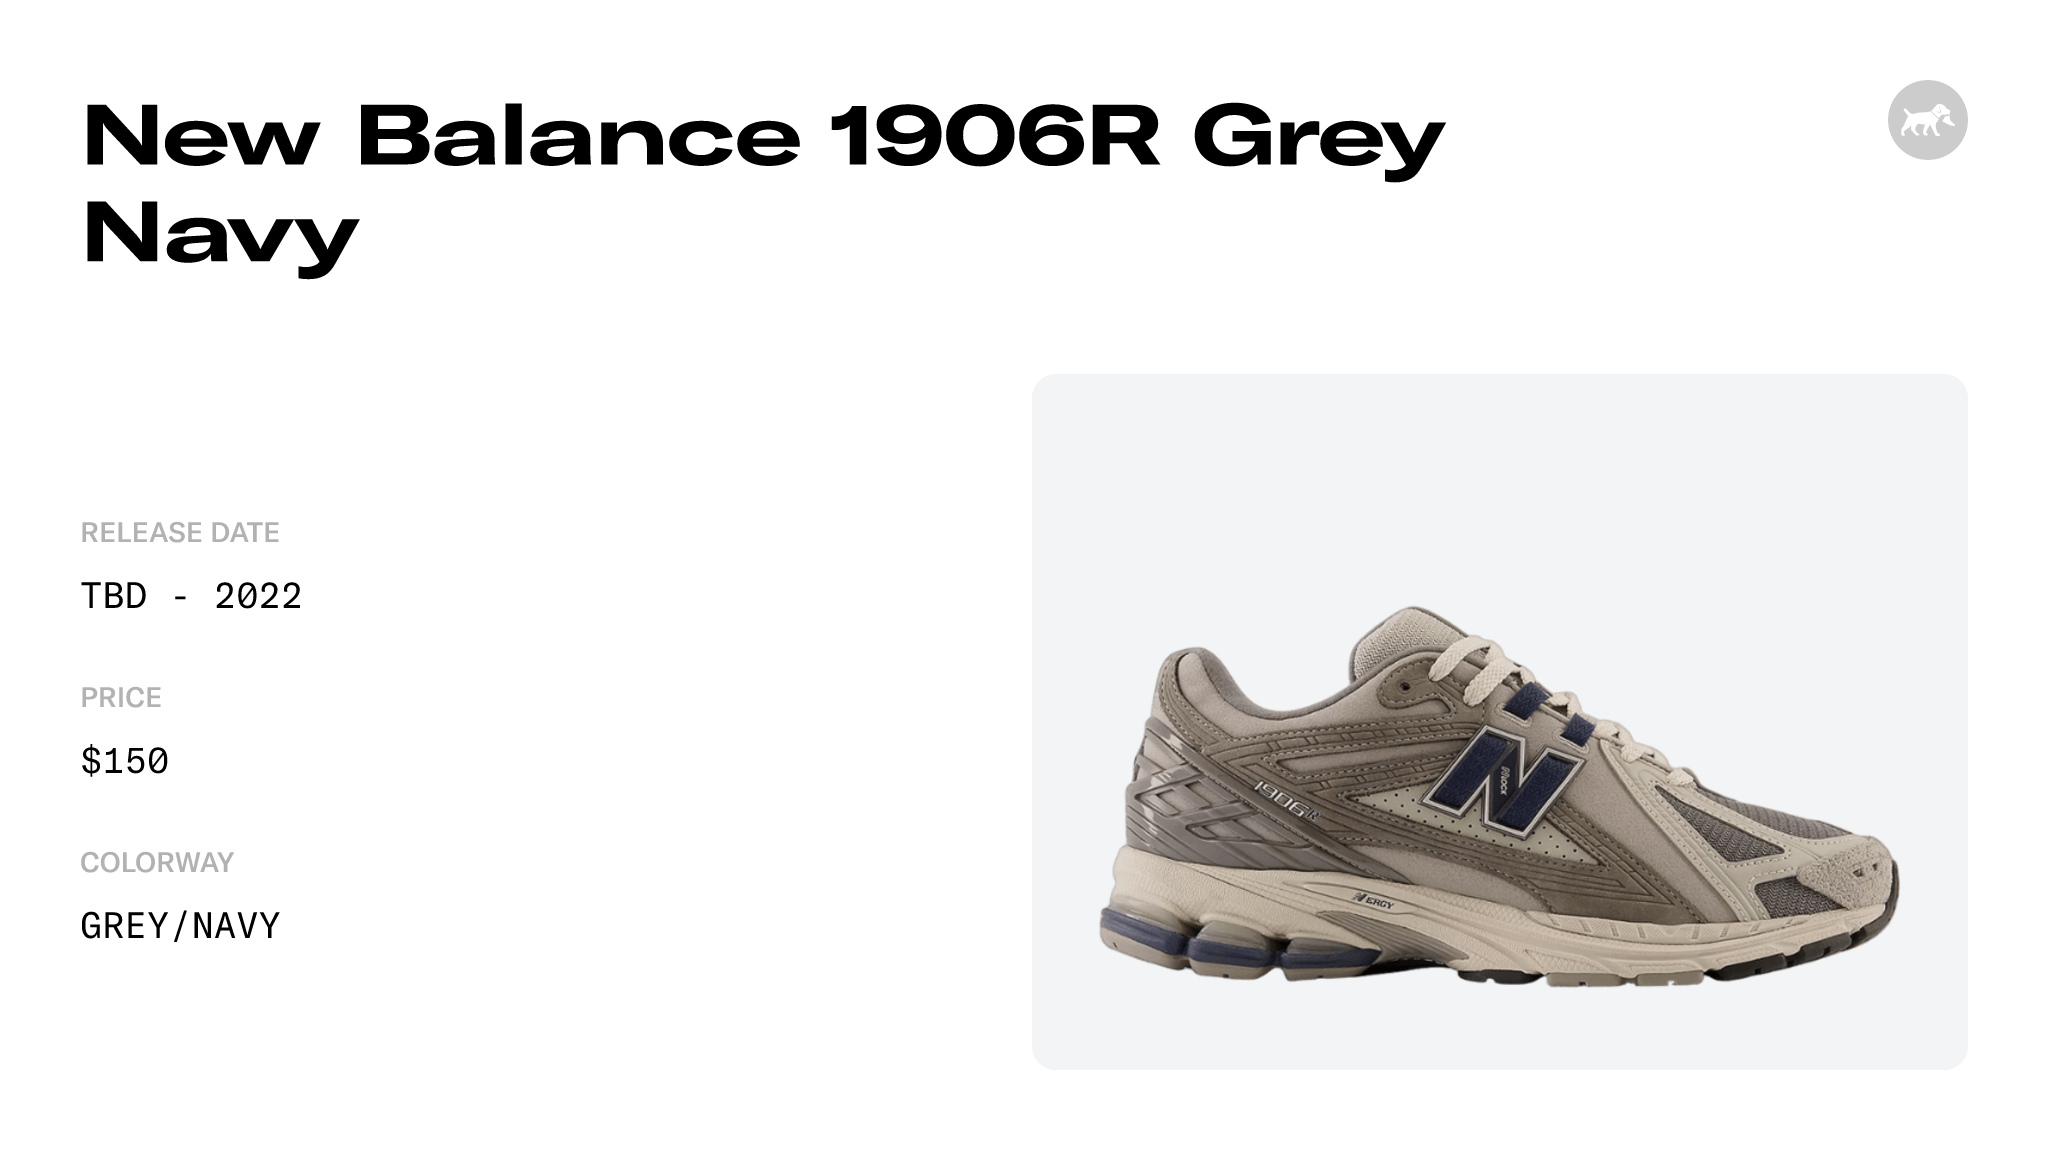 New Balance 1906R Grey Navy - M1906RGN Raffles and Release Date